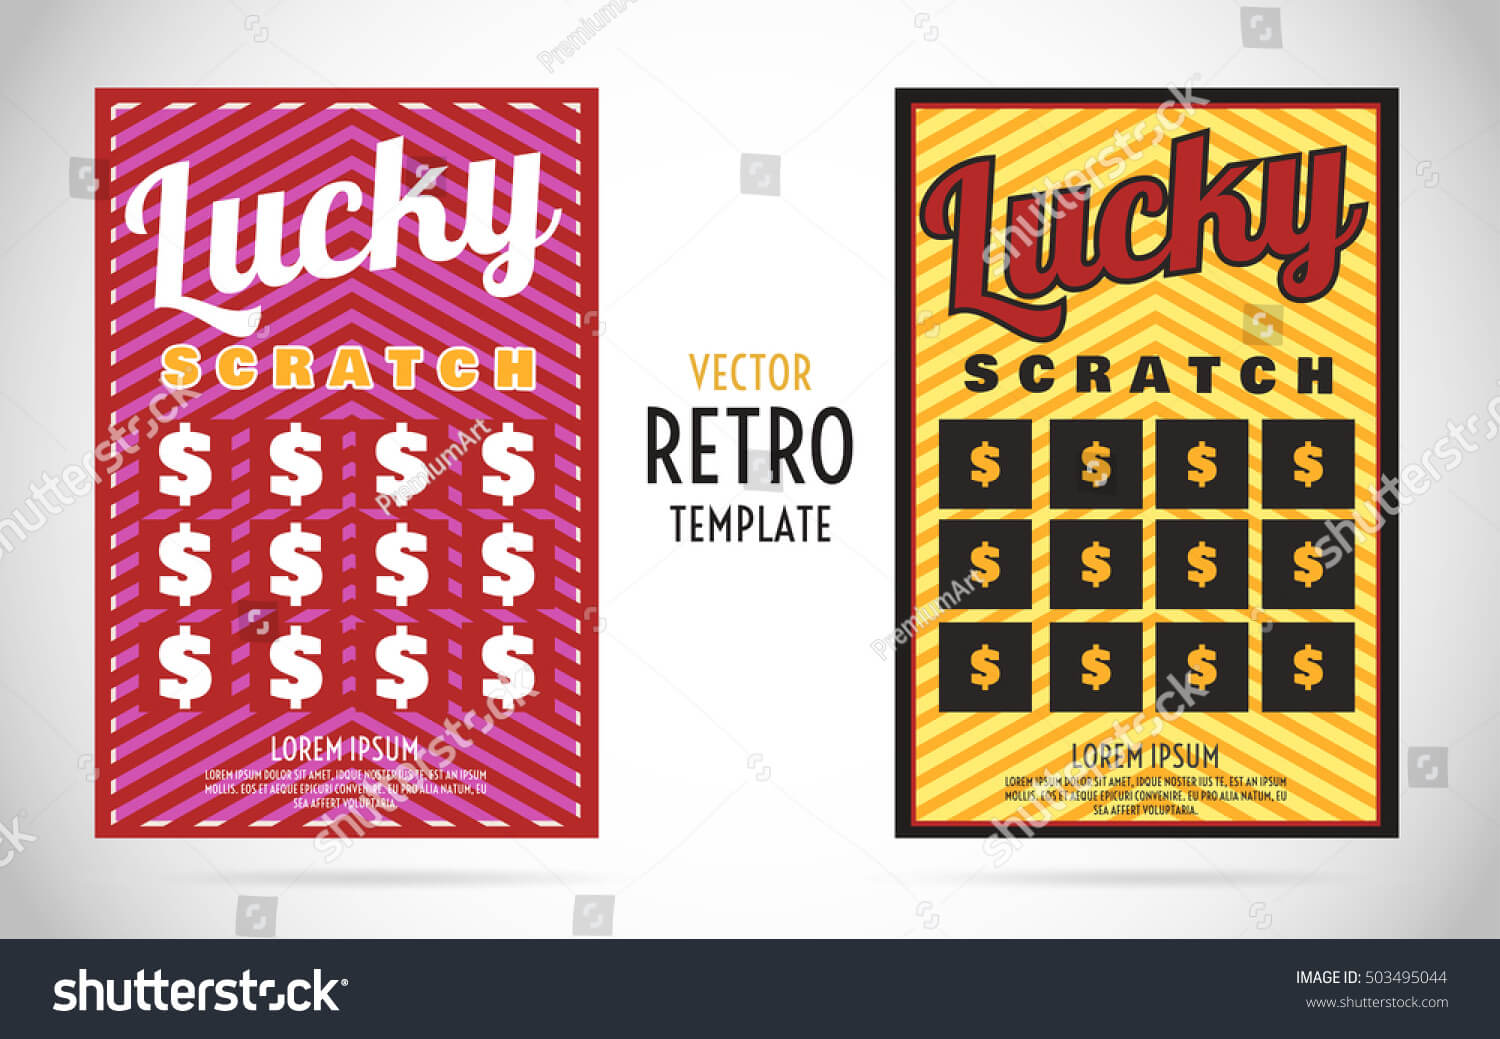 Scratch Off Lottery Card Ticket Vector Stock Vector (Royalty With Regard To Scratch Off Card Templates